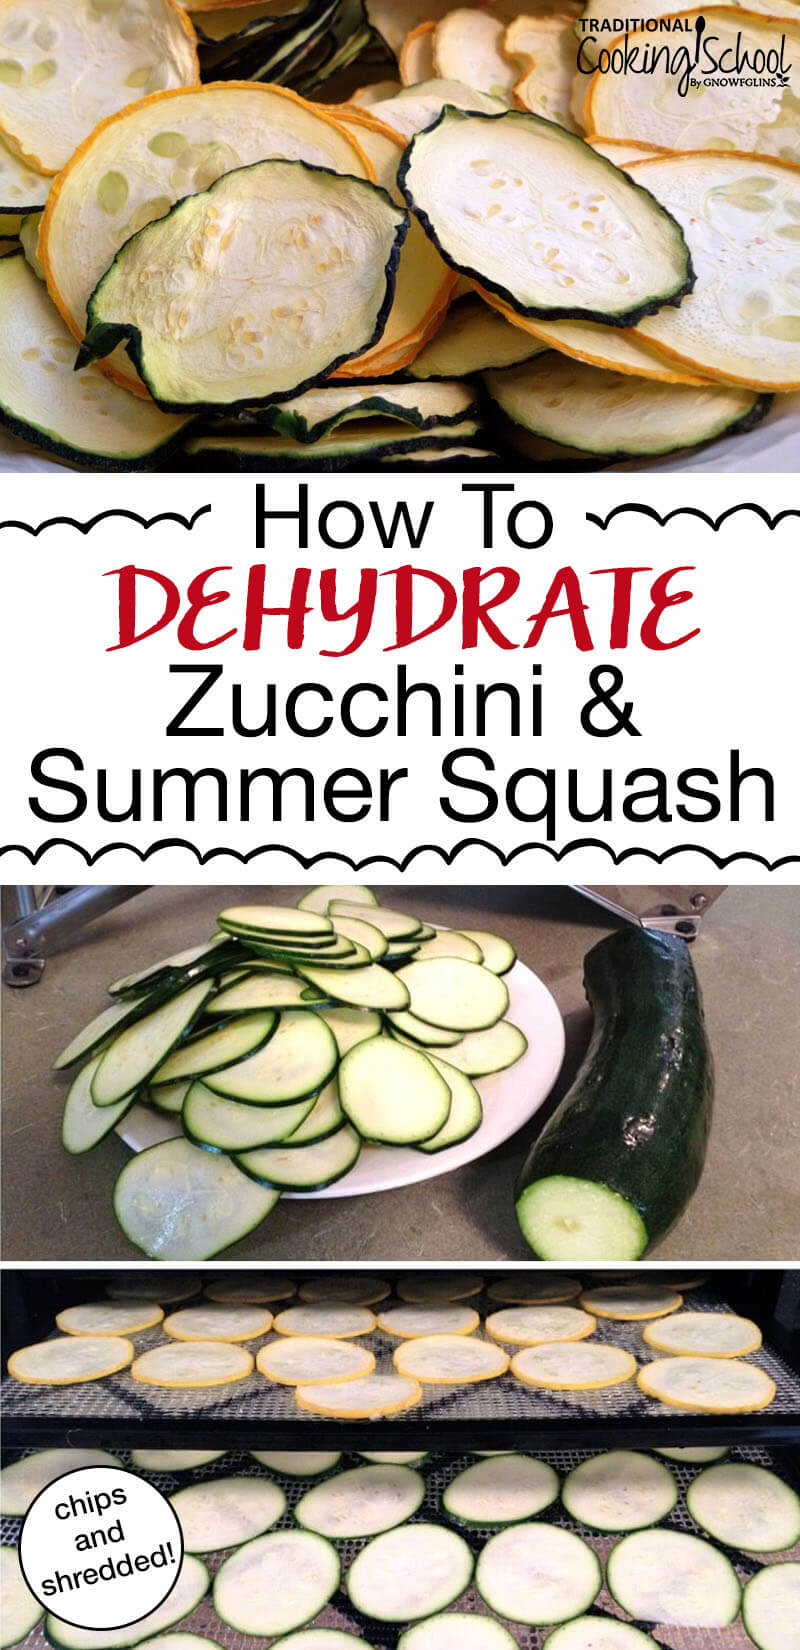 What do you do when zucchini and summer squash are exploding in your garden? Make chips, noodles or shreds! These recipes are the perfect, low carb healthy snacks and make for quick and easy meals. You can dehydrate them in your dehydrator or in your oven! #zucchini #squash #dehydrator #recipes #chips #noodles